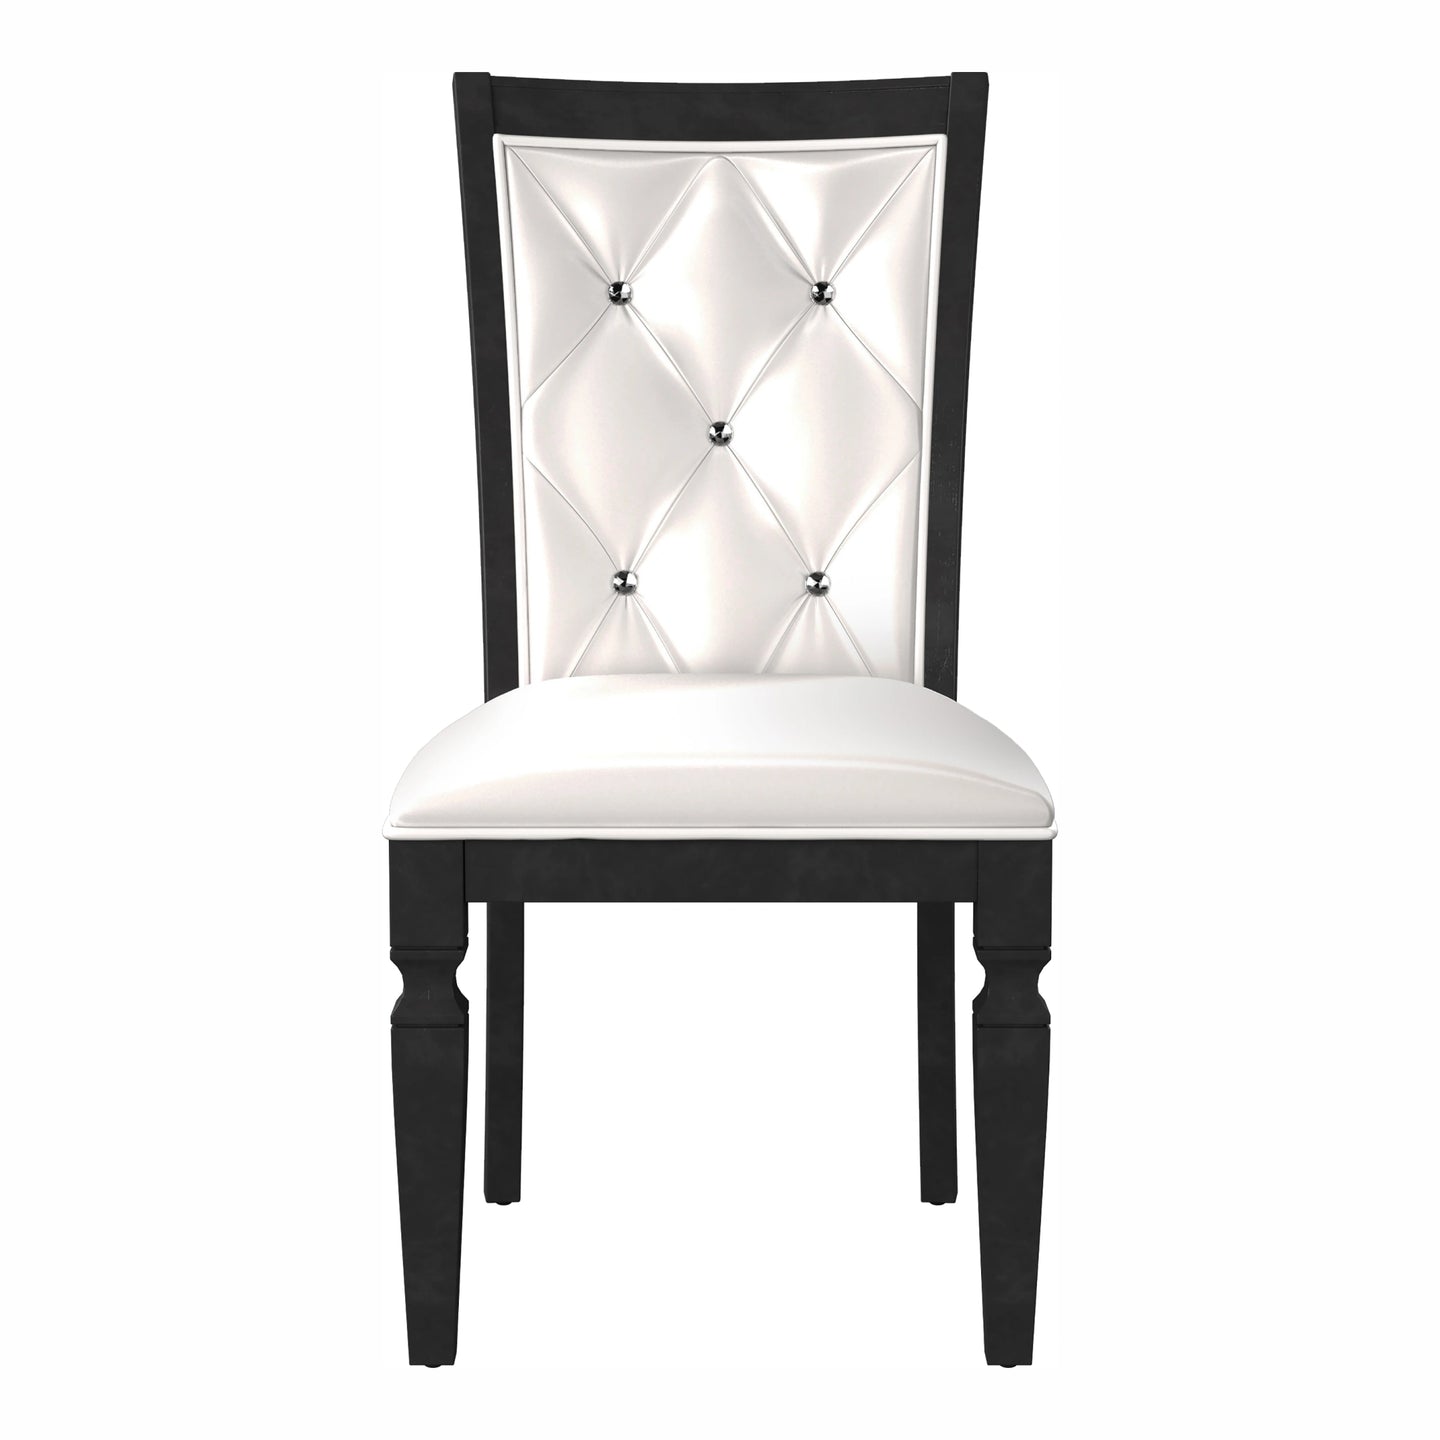 Furniture of America Morgen Contemporary Tufted Side Chairs in Black and Silver (Set of 2) - IDF-3452BK-SC